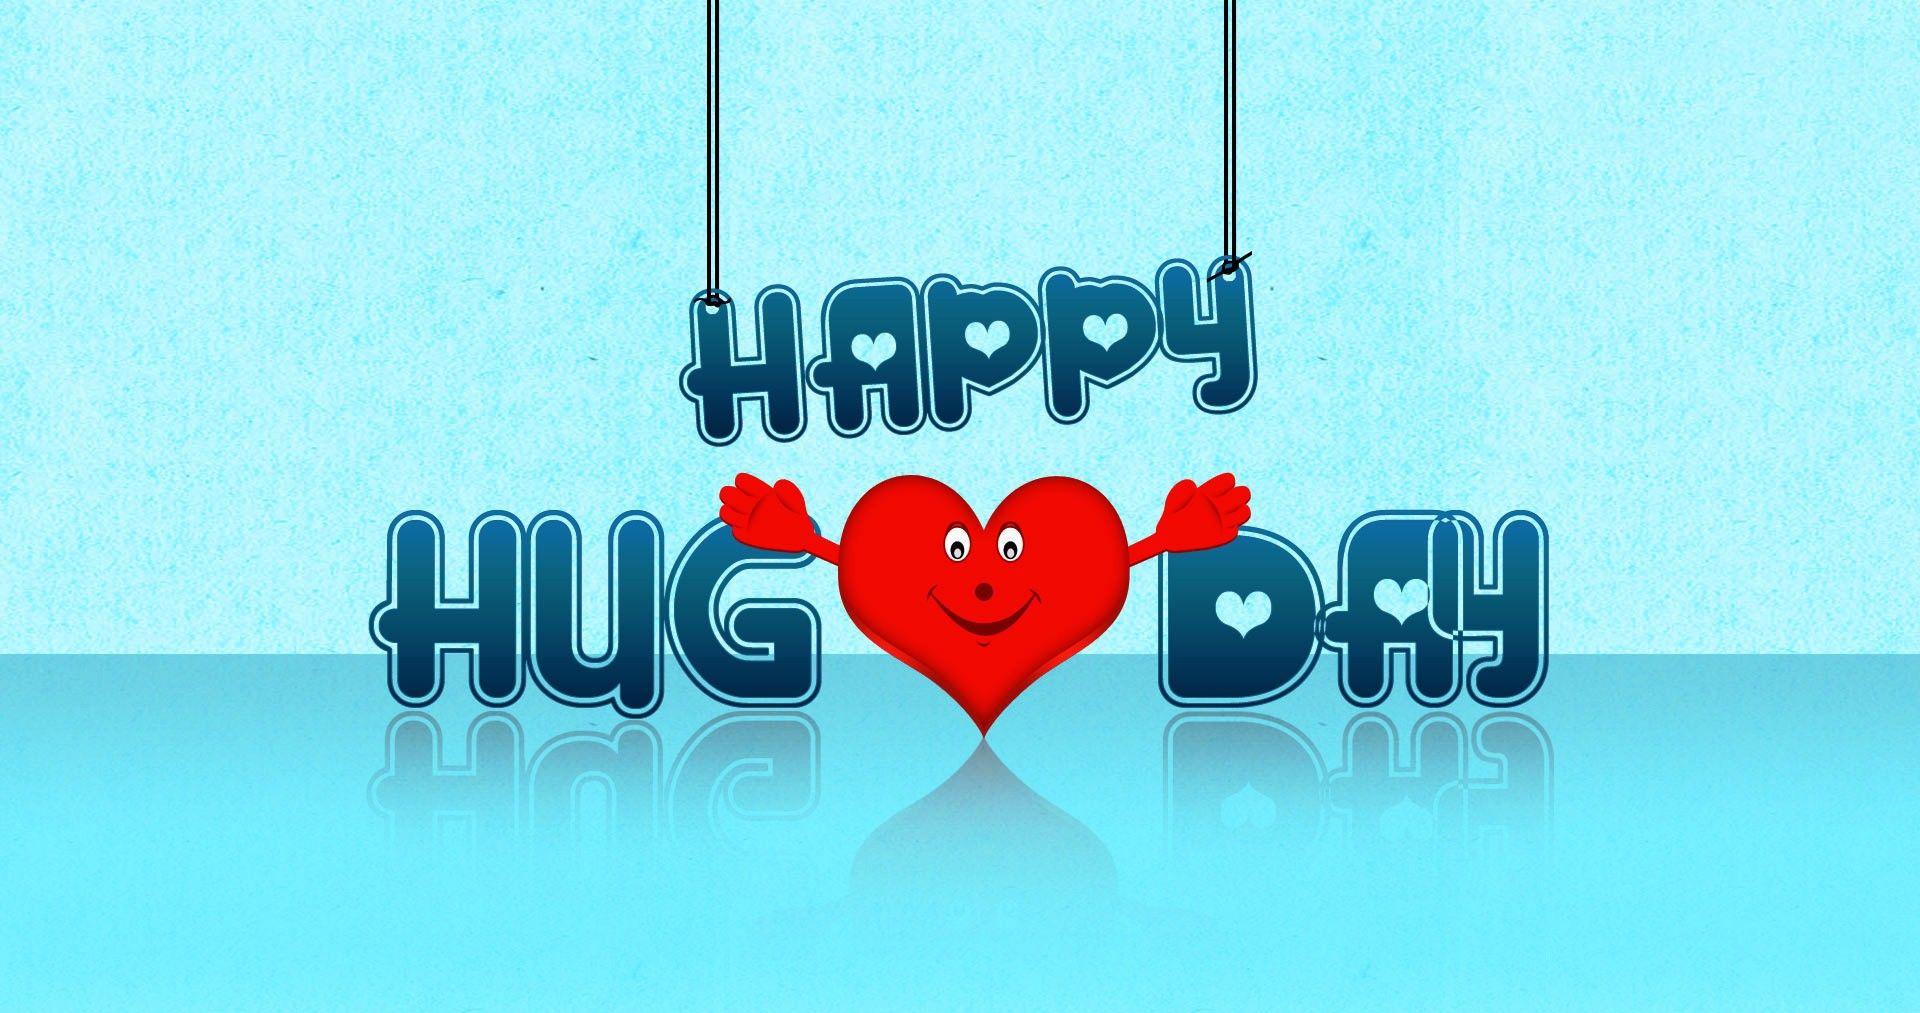 Happy Hug Day Heart Graphic, Download Fastival greetings, HD Desktop